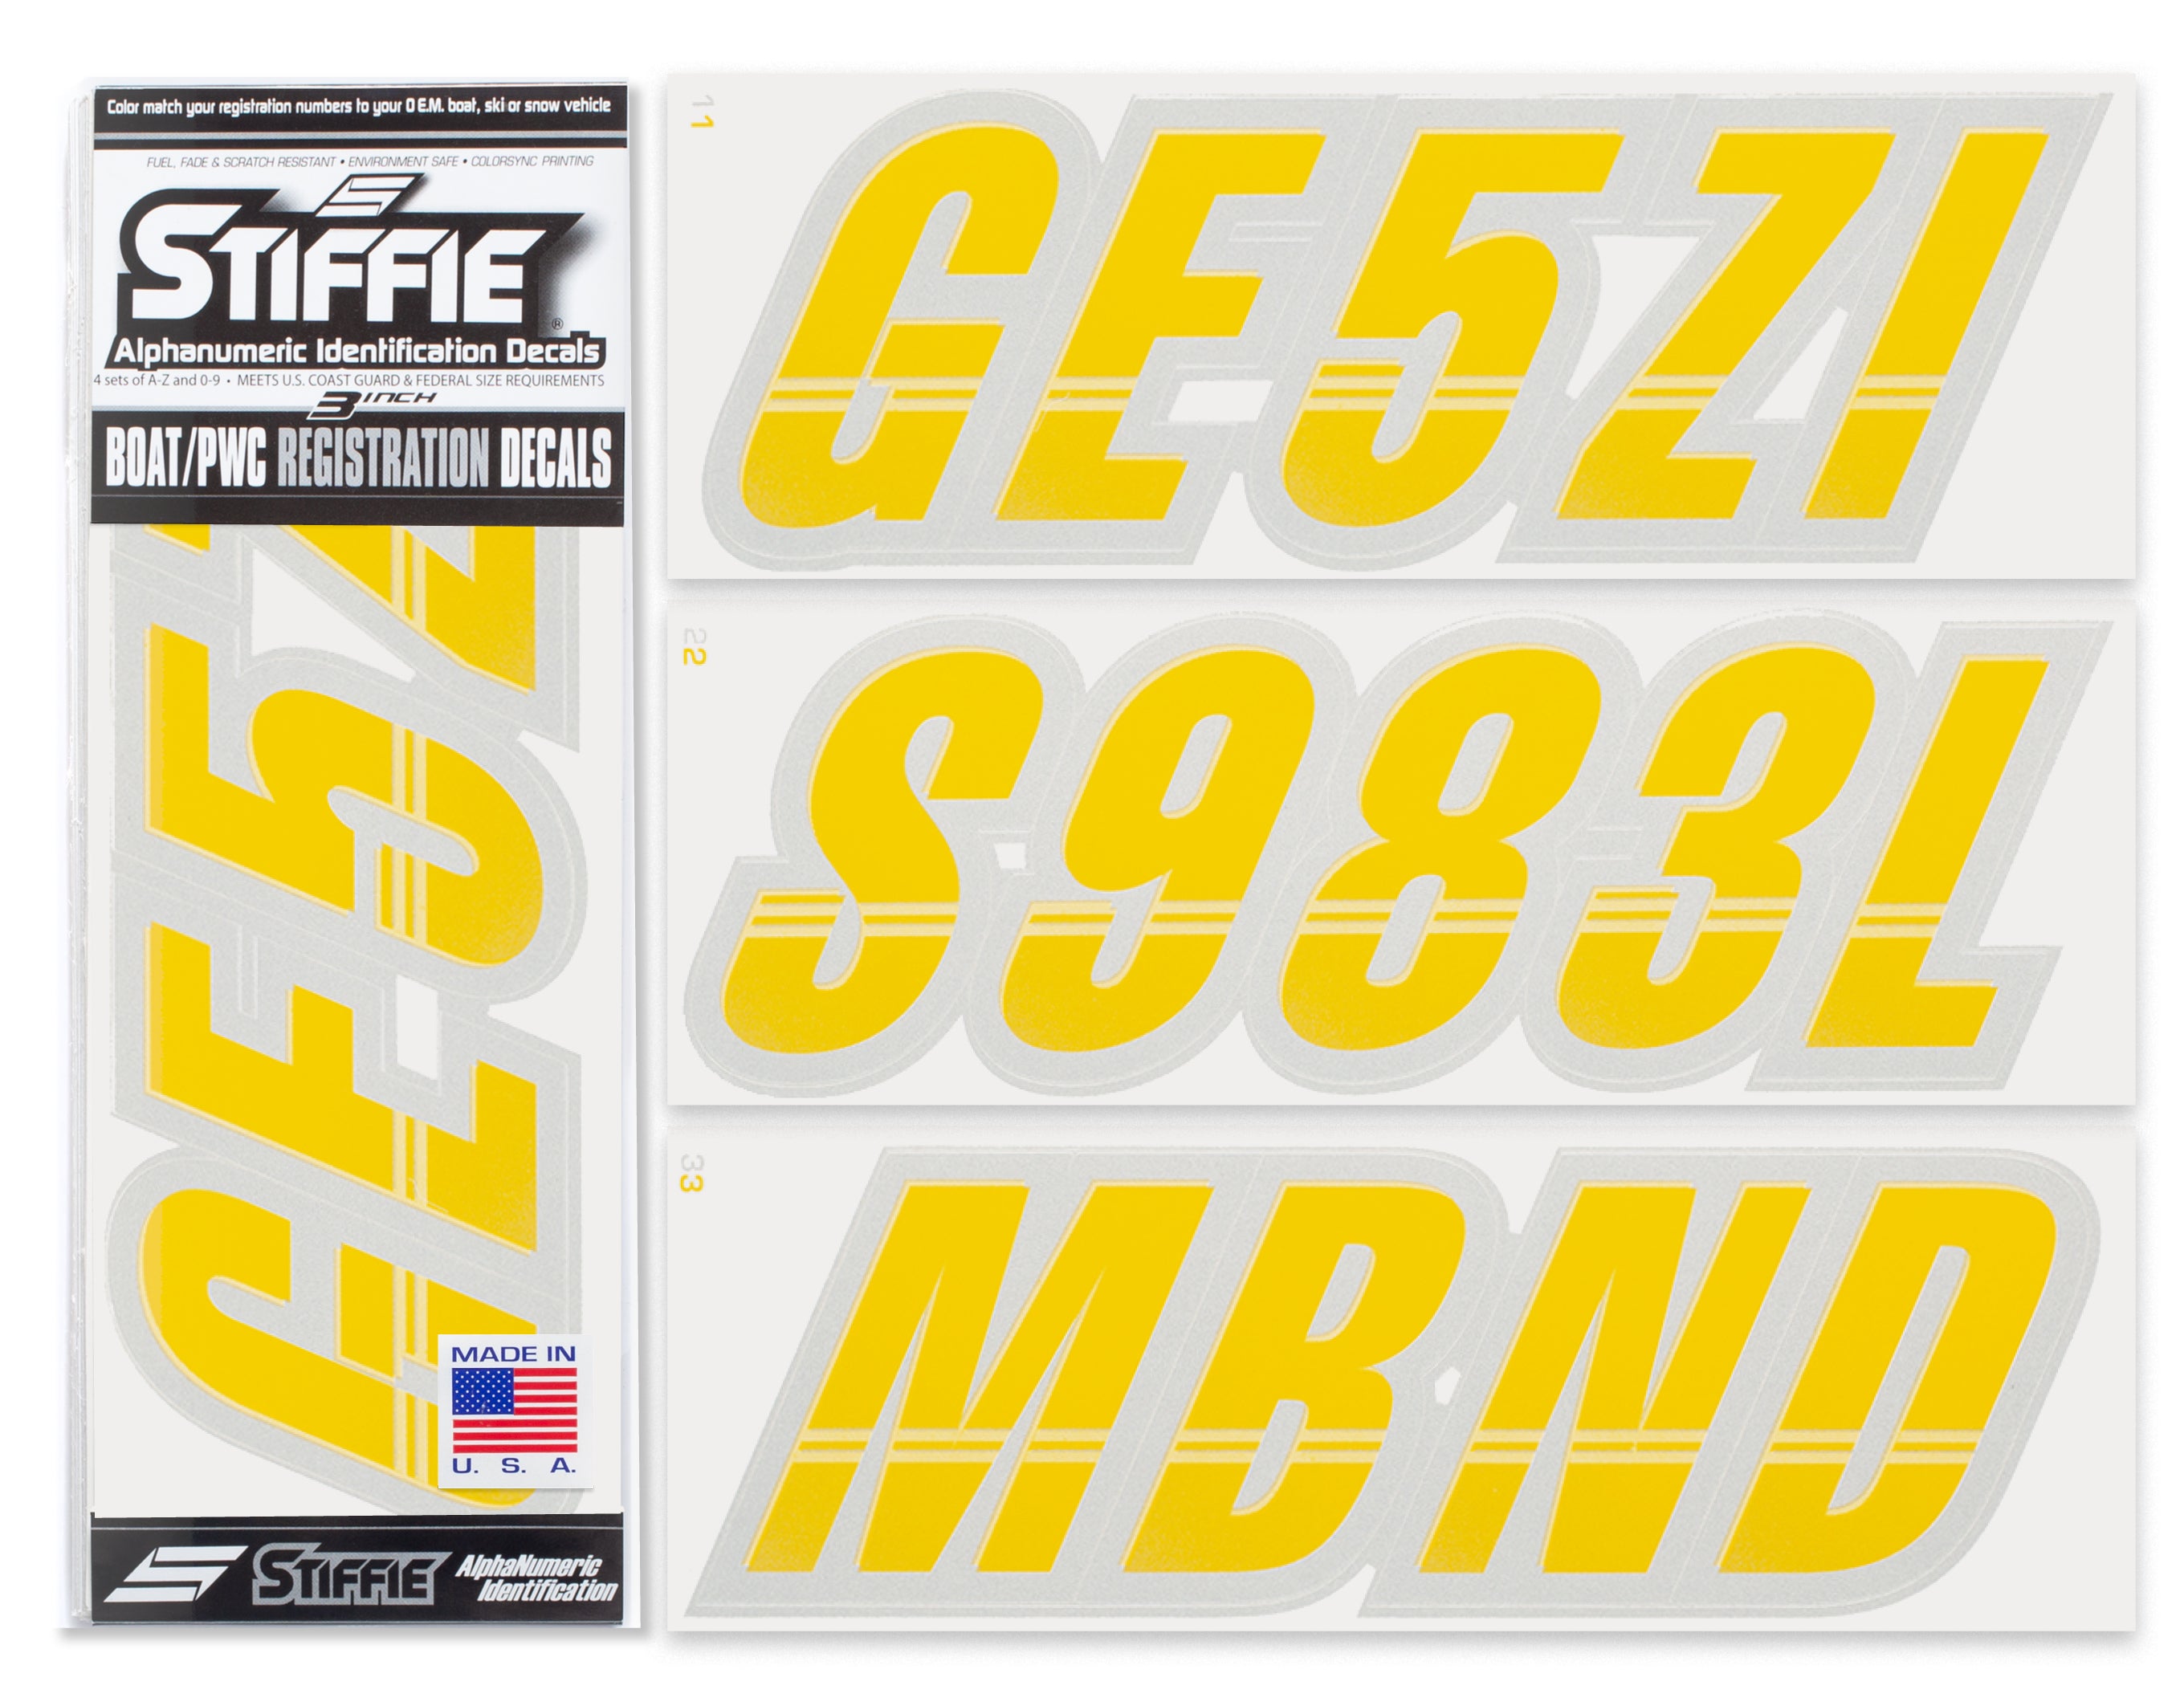 Stiffie Techtron Yellow/Silver 3" Alpha-Numeric Registration Identification Numbers Stickers Decals for Boats & Personal Watercraft